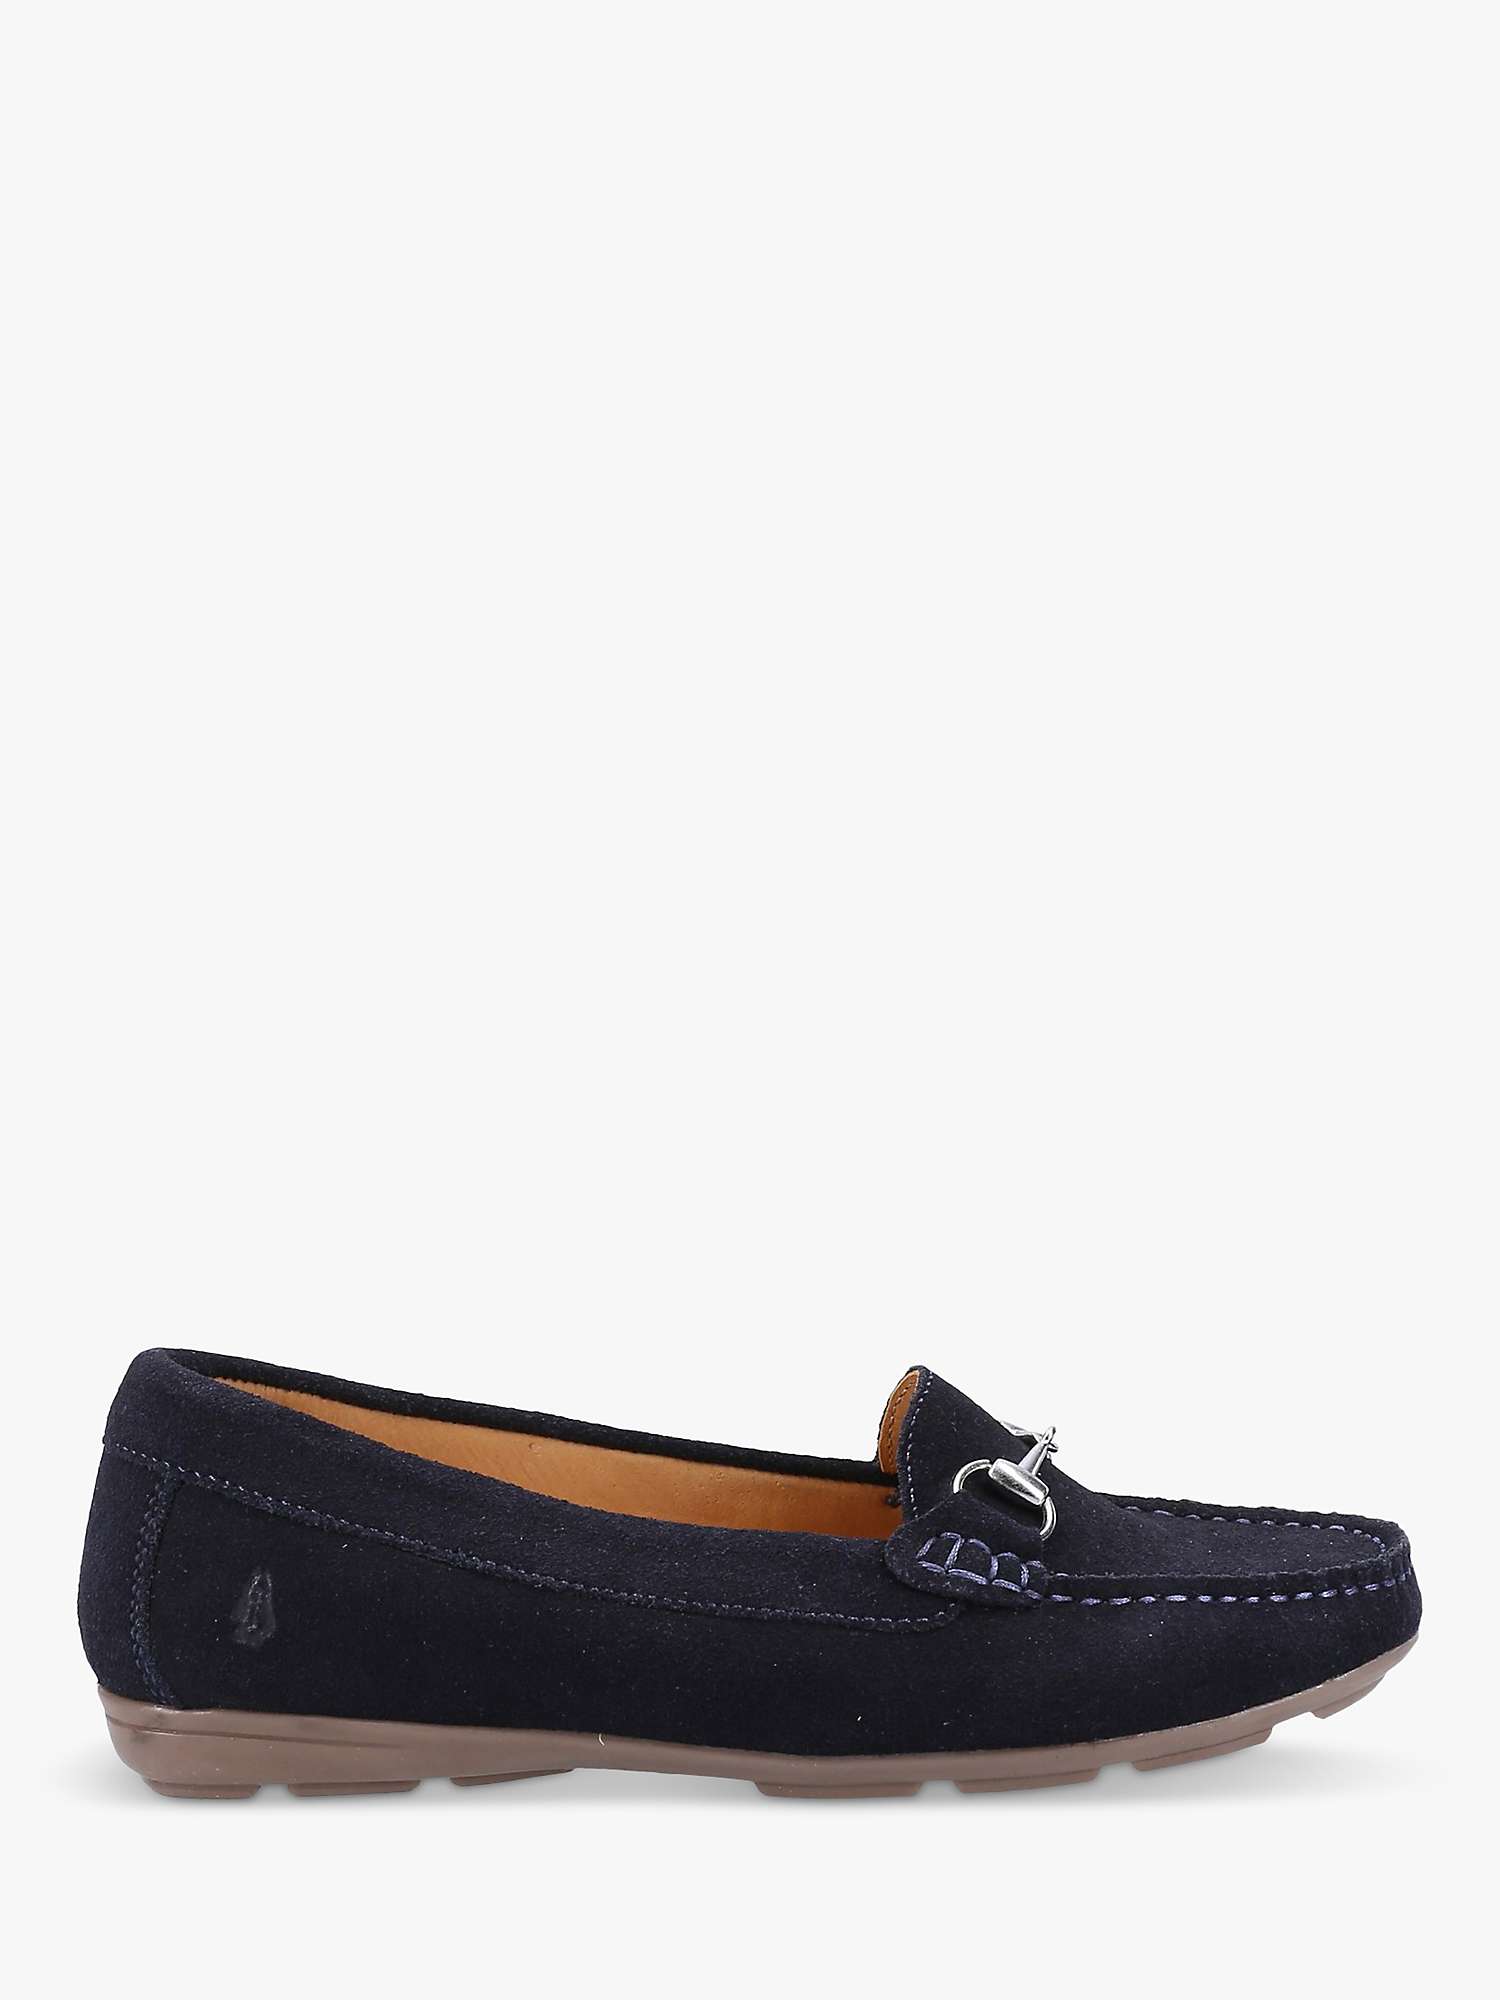 Buy Hush Puppies Molly Snaffle Nubuck Leather Loafers Online at johnlewis.com